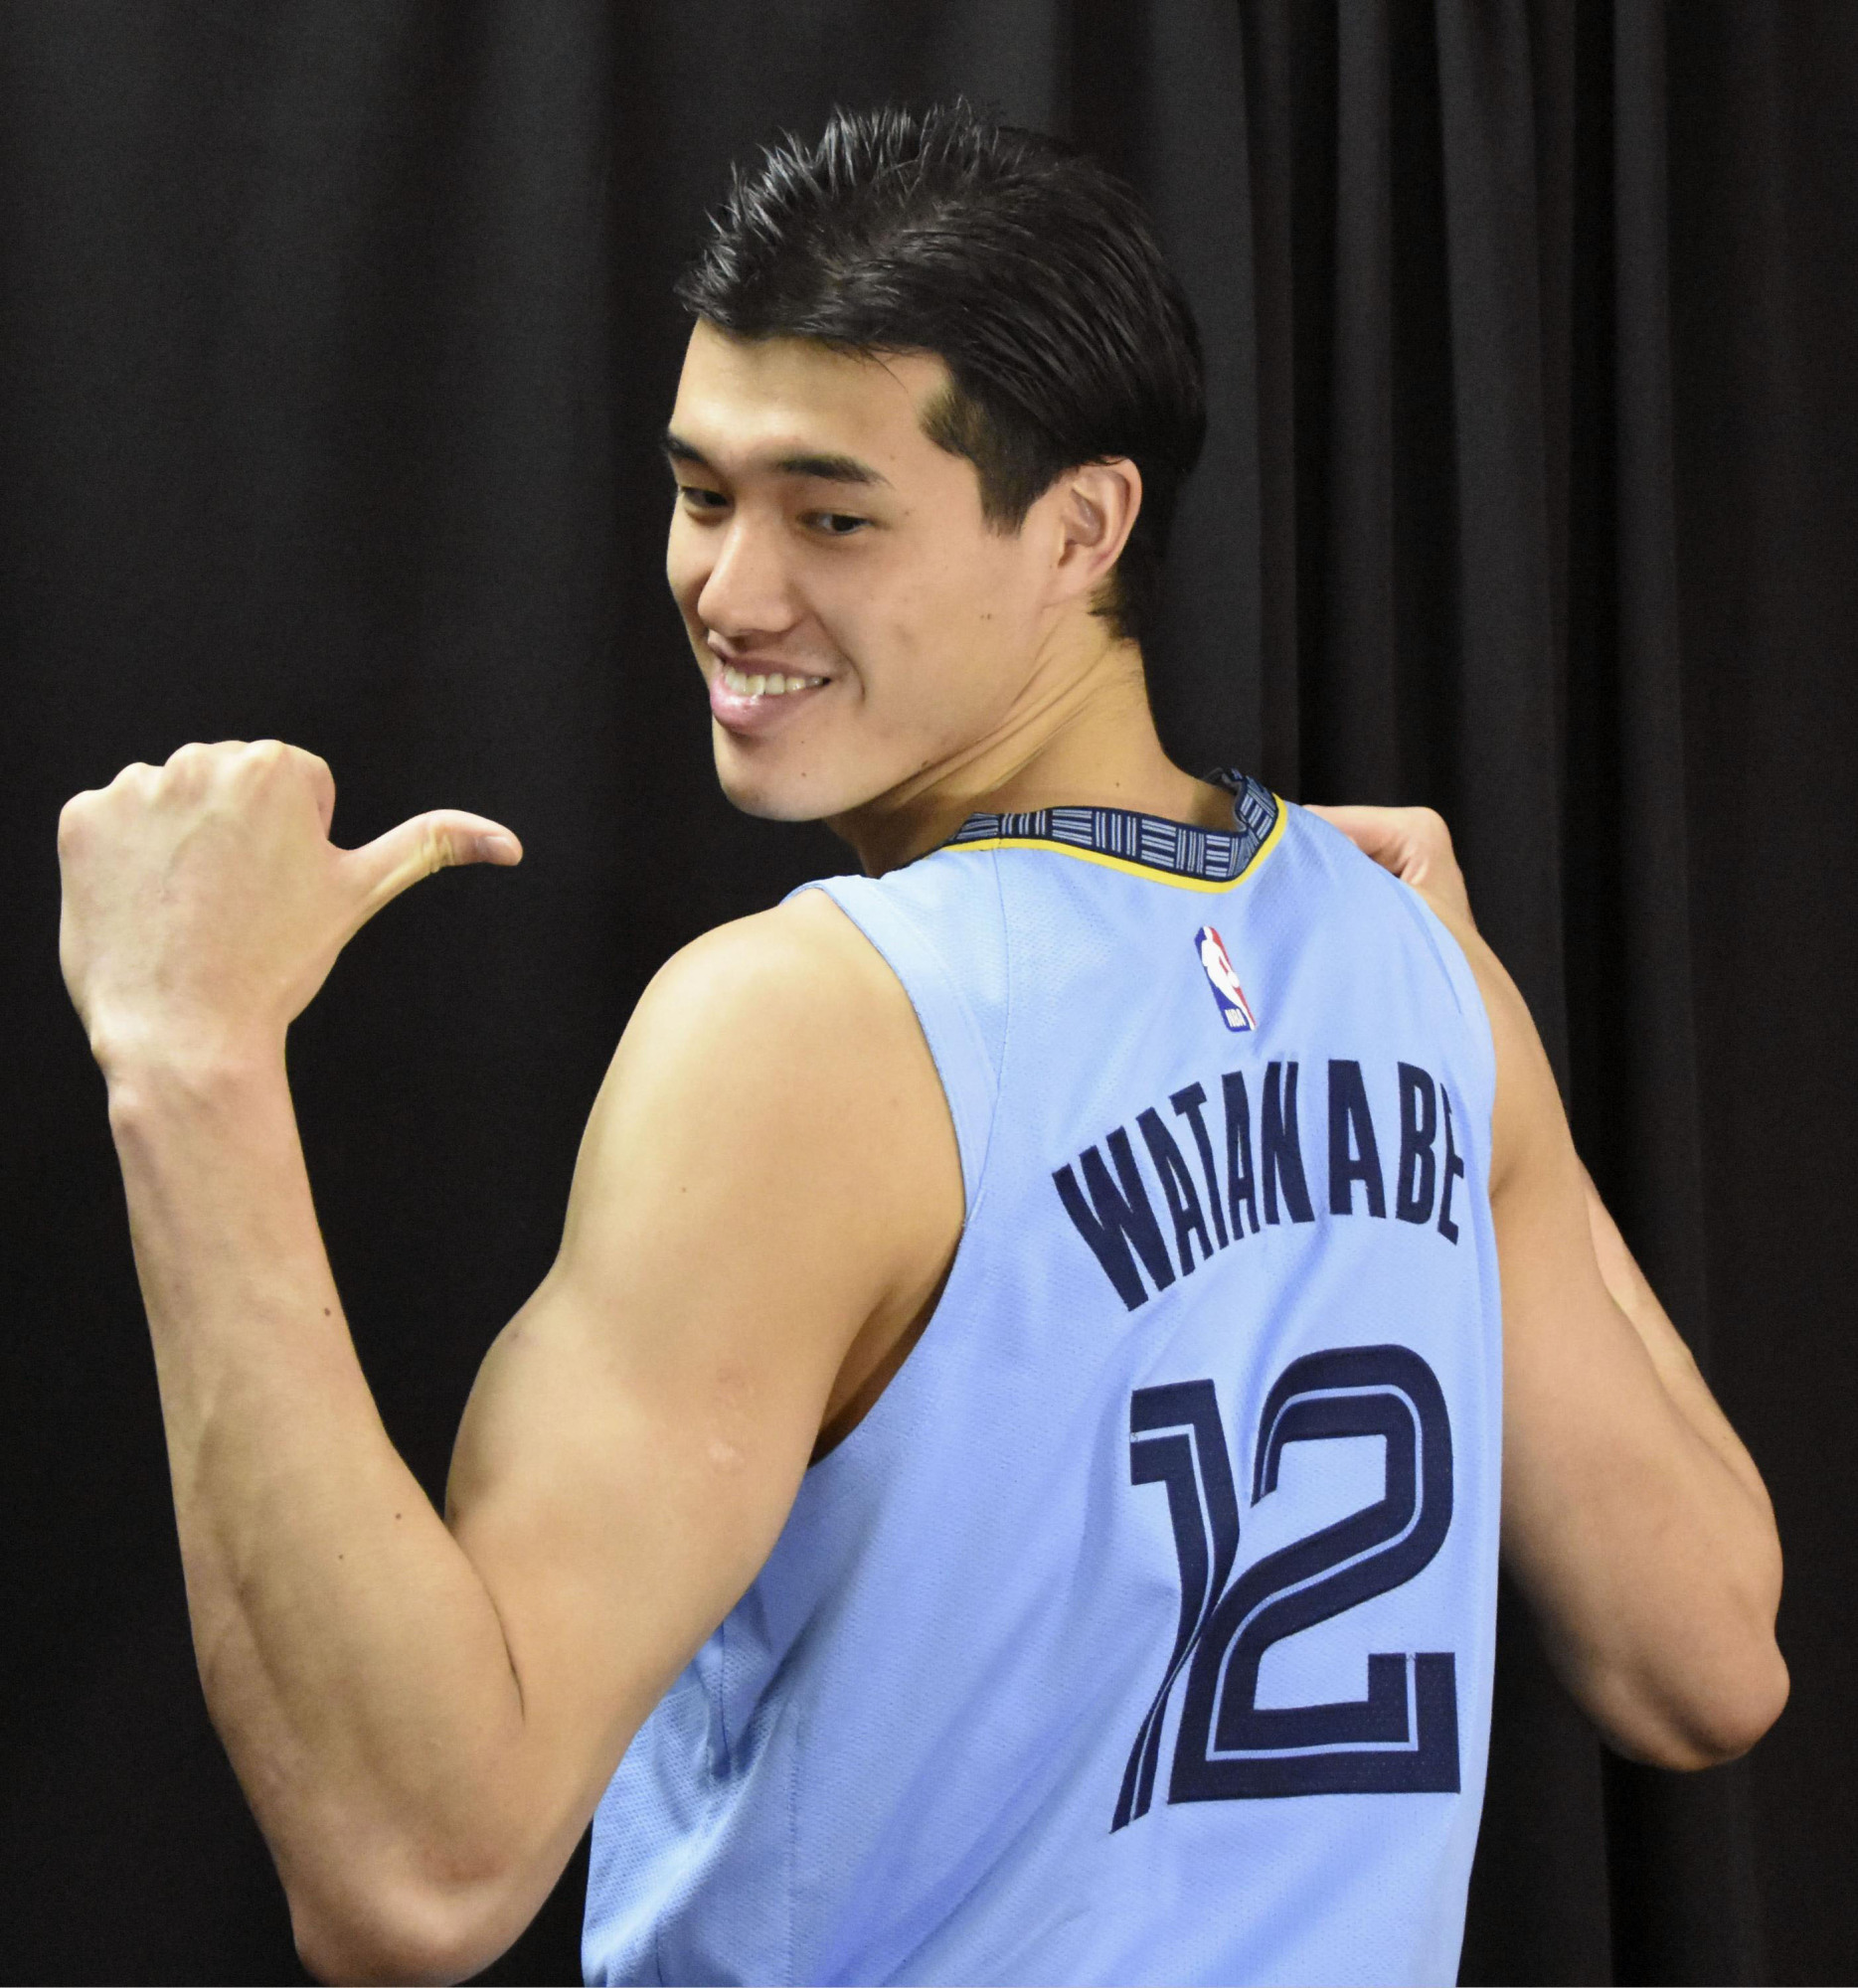 Japan's Interest In NBA Could Explode If Watanabe Makes Grizzlies